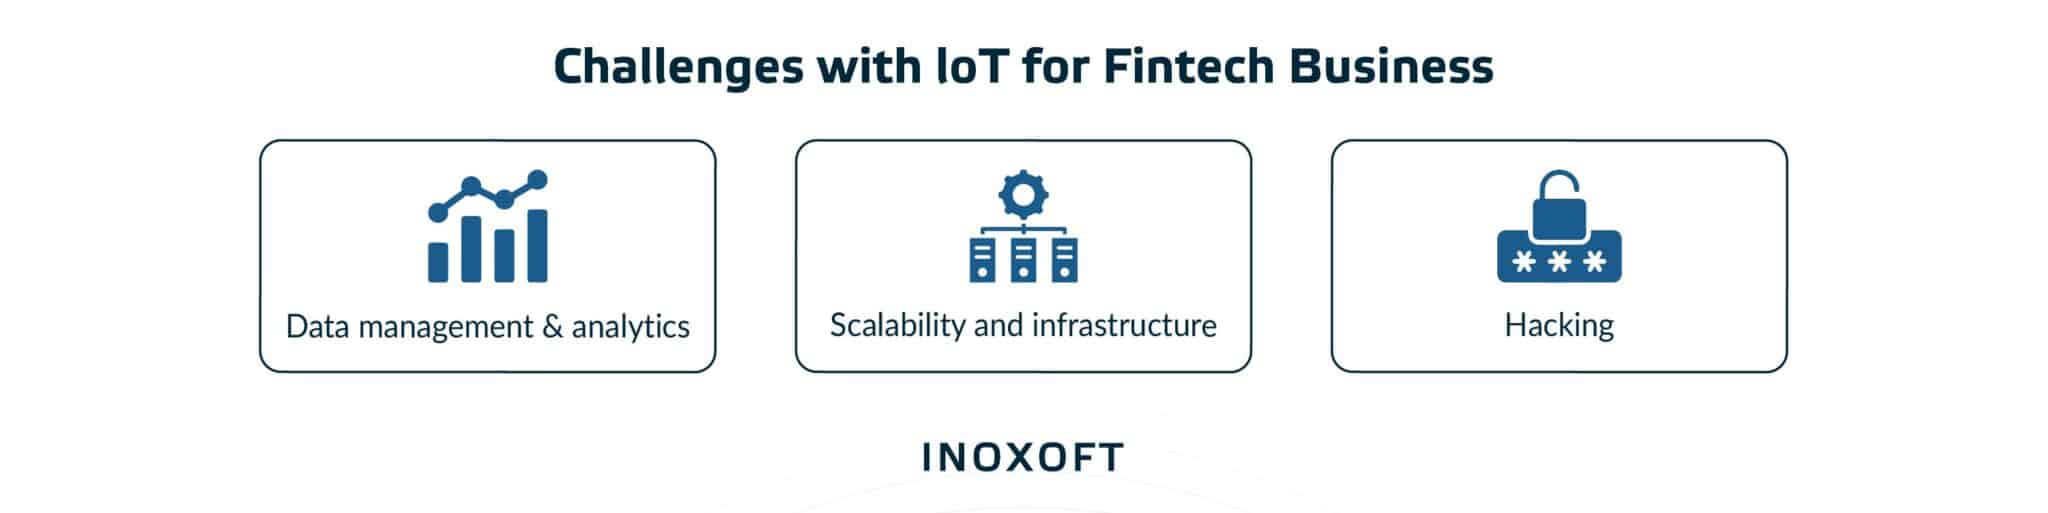 Challenges with IoT for Fintech Businesses